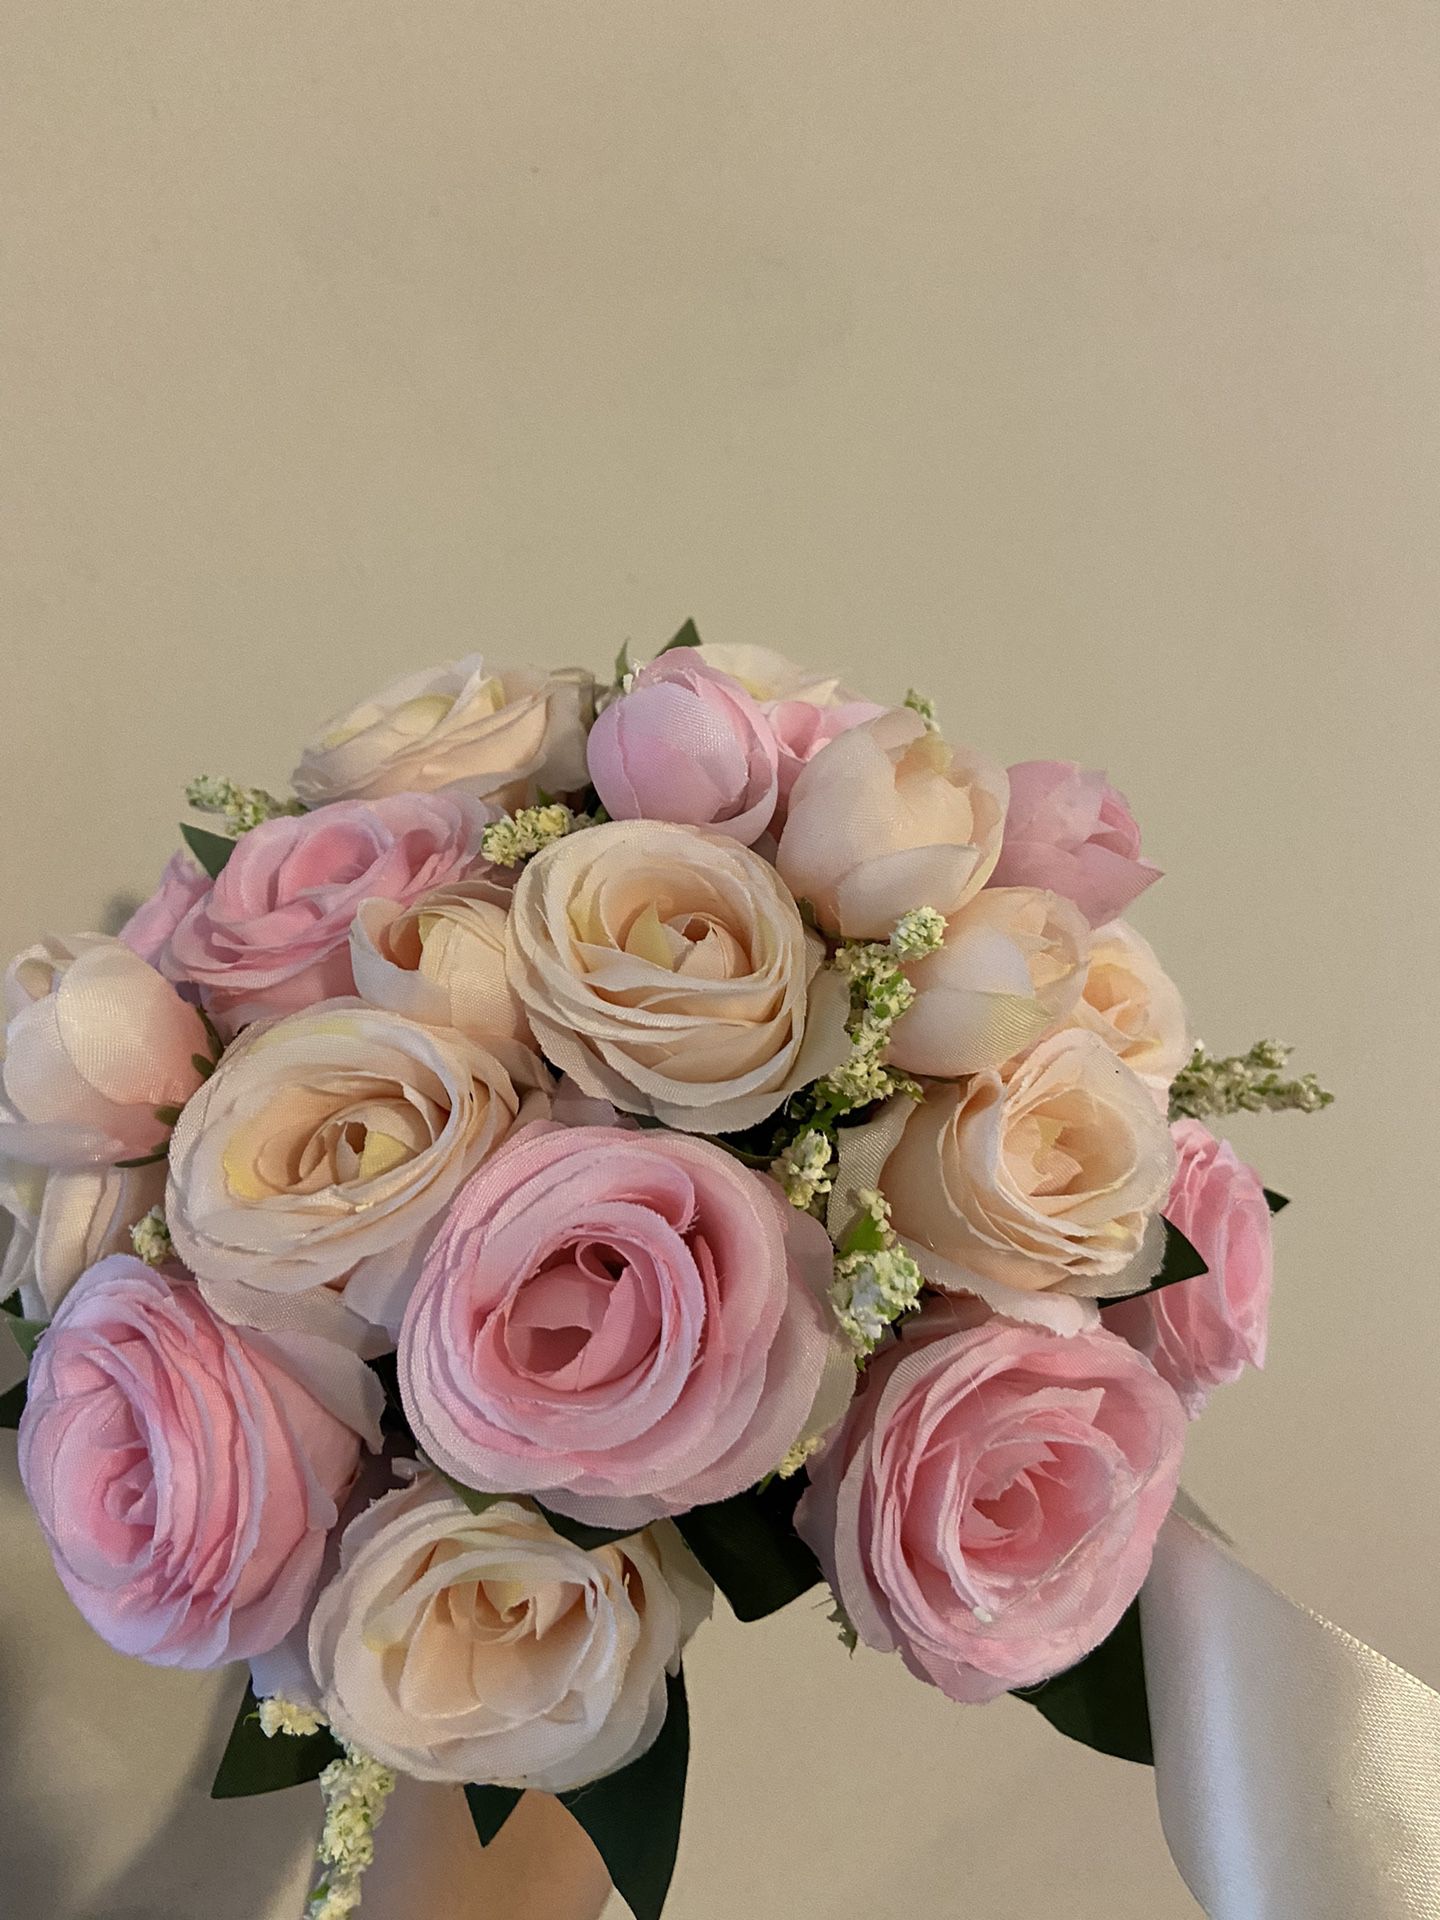 Holding Flowers Artificial Natural Rose Wedding Bouquet with Silk Satin Ribbon Pink White Champagne Bridesmaid Bridal Party The diameter of the top of